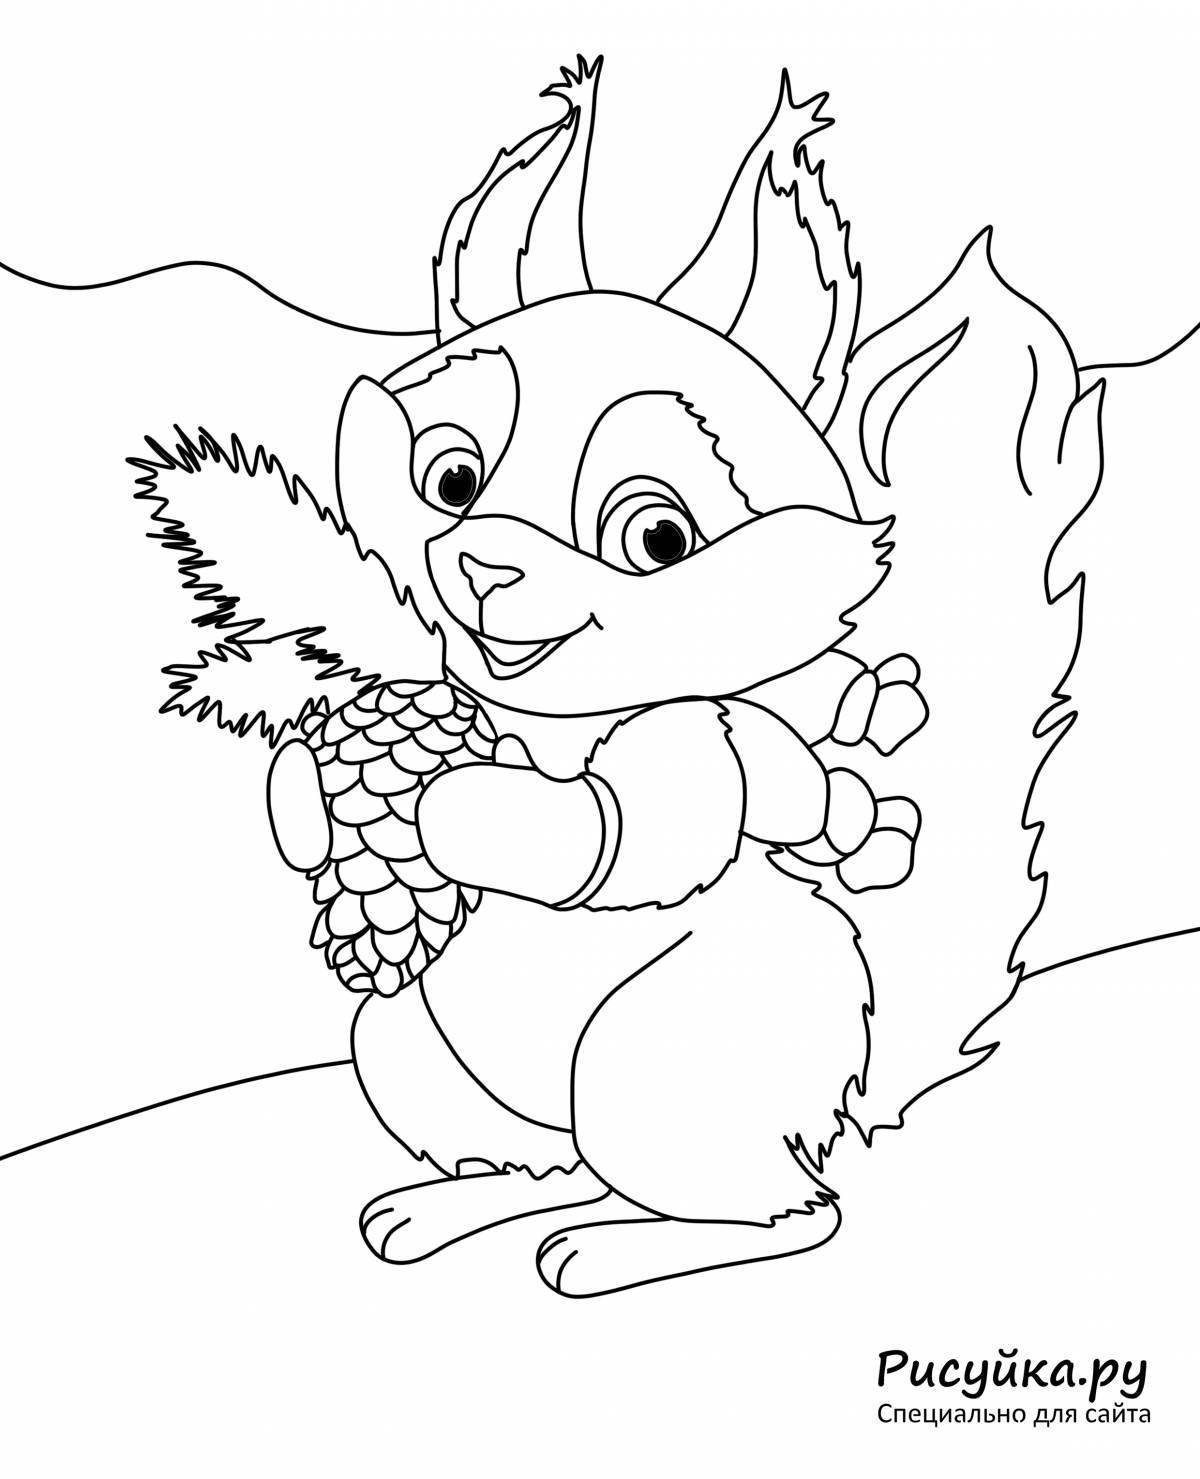 Fun coloring book squirrel for children 6-7 years old